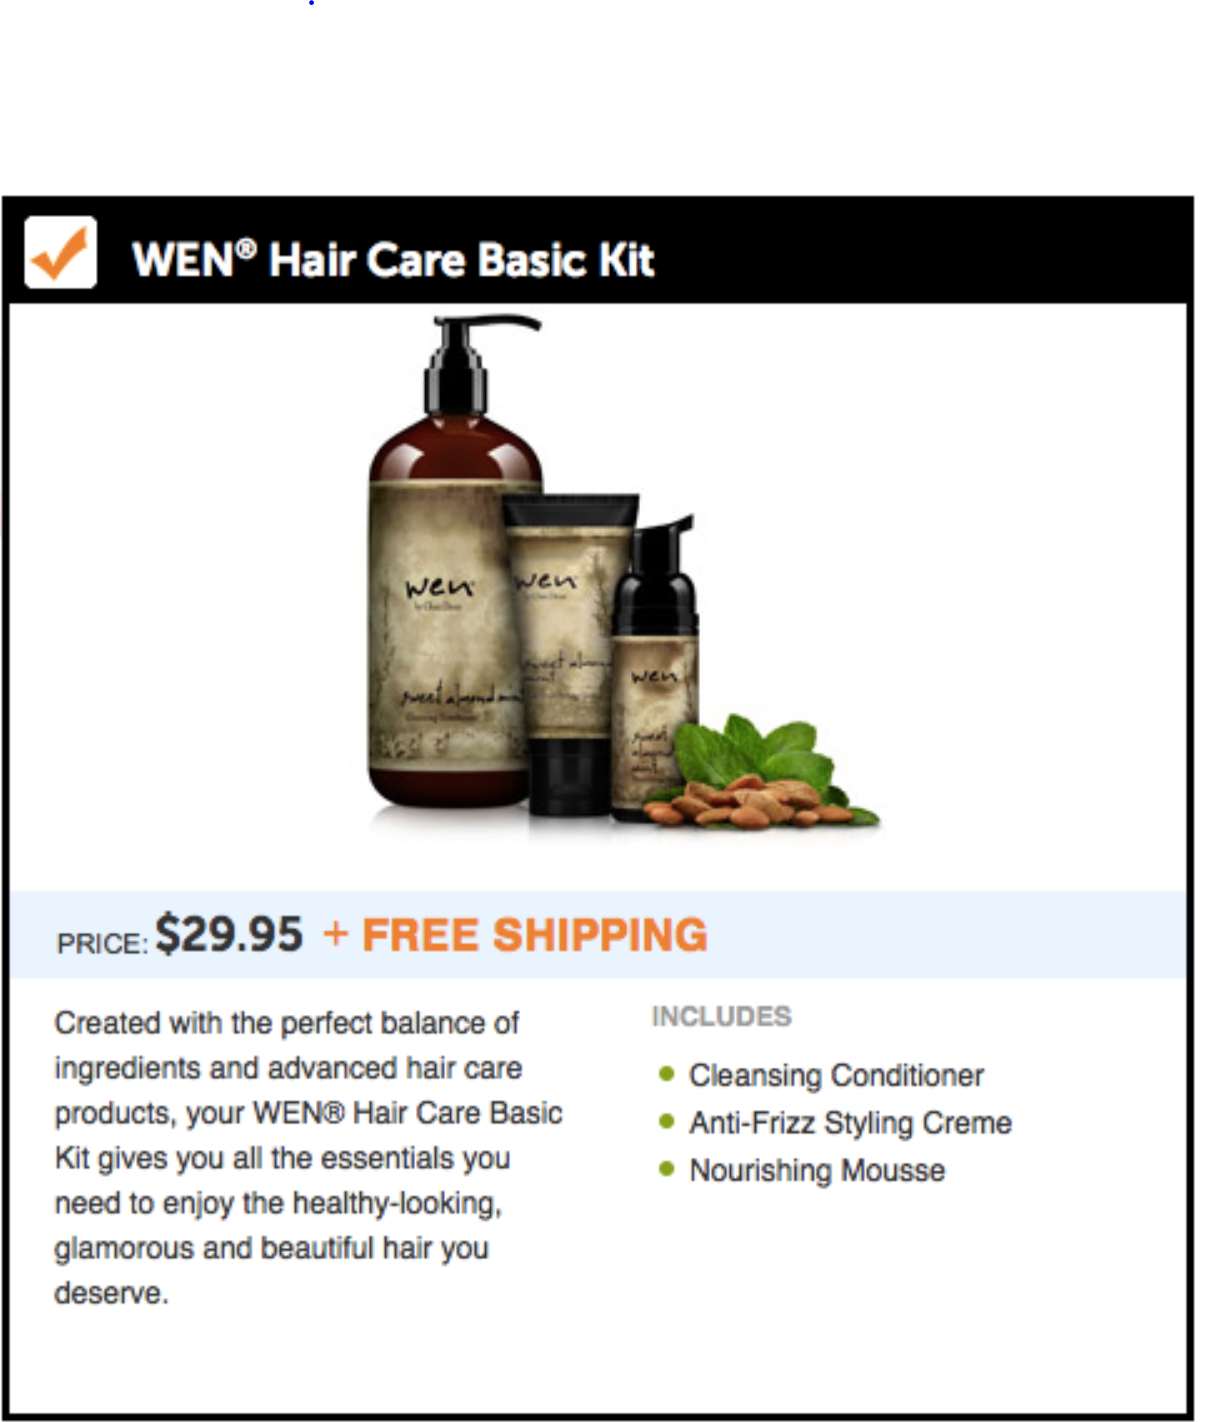 Order Wen Hair Care And Get Free Gift